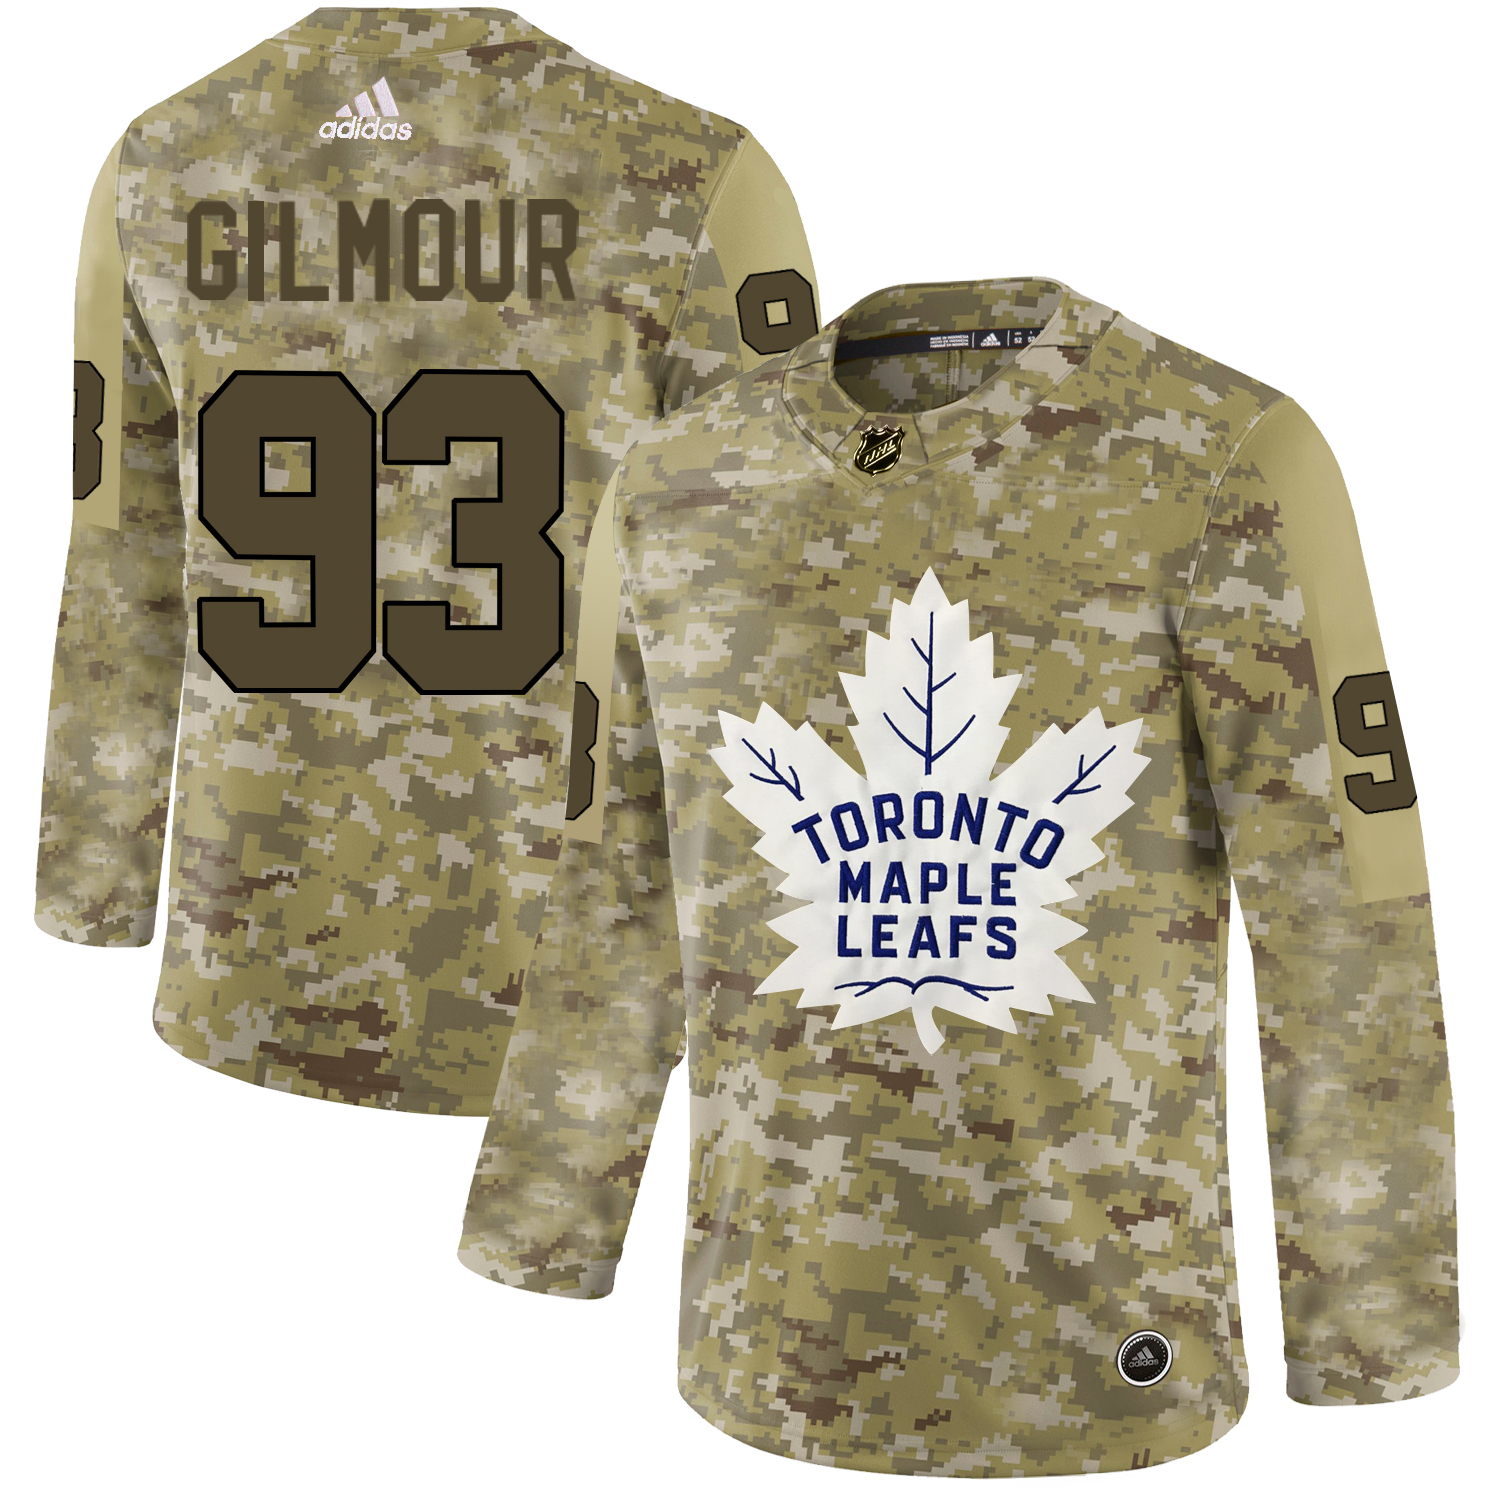 Adidas Maple Leafs #93 Doug Gilmour Camo Authentic Stitched NHL Jersey